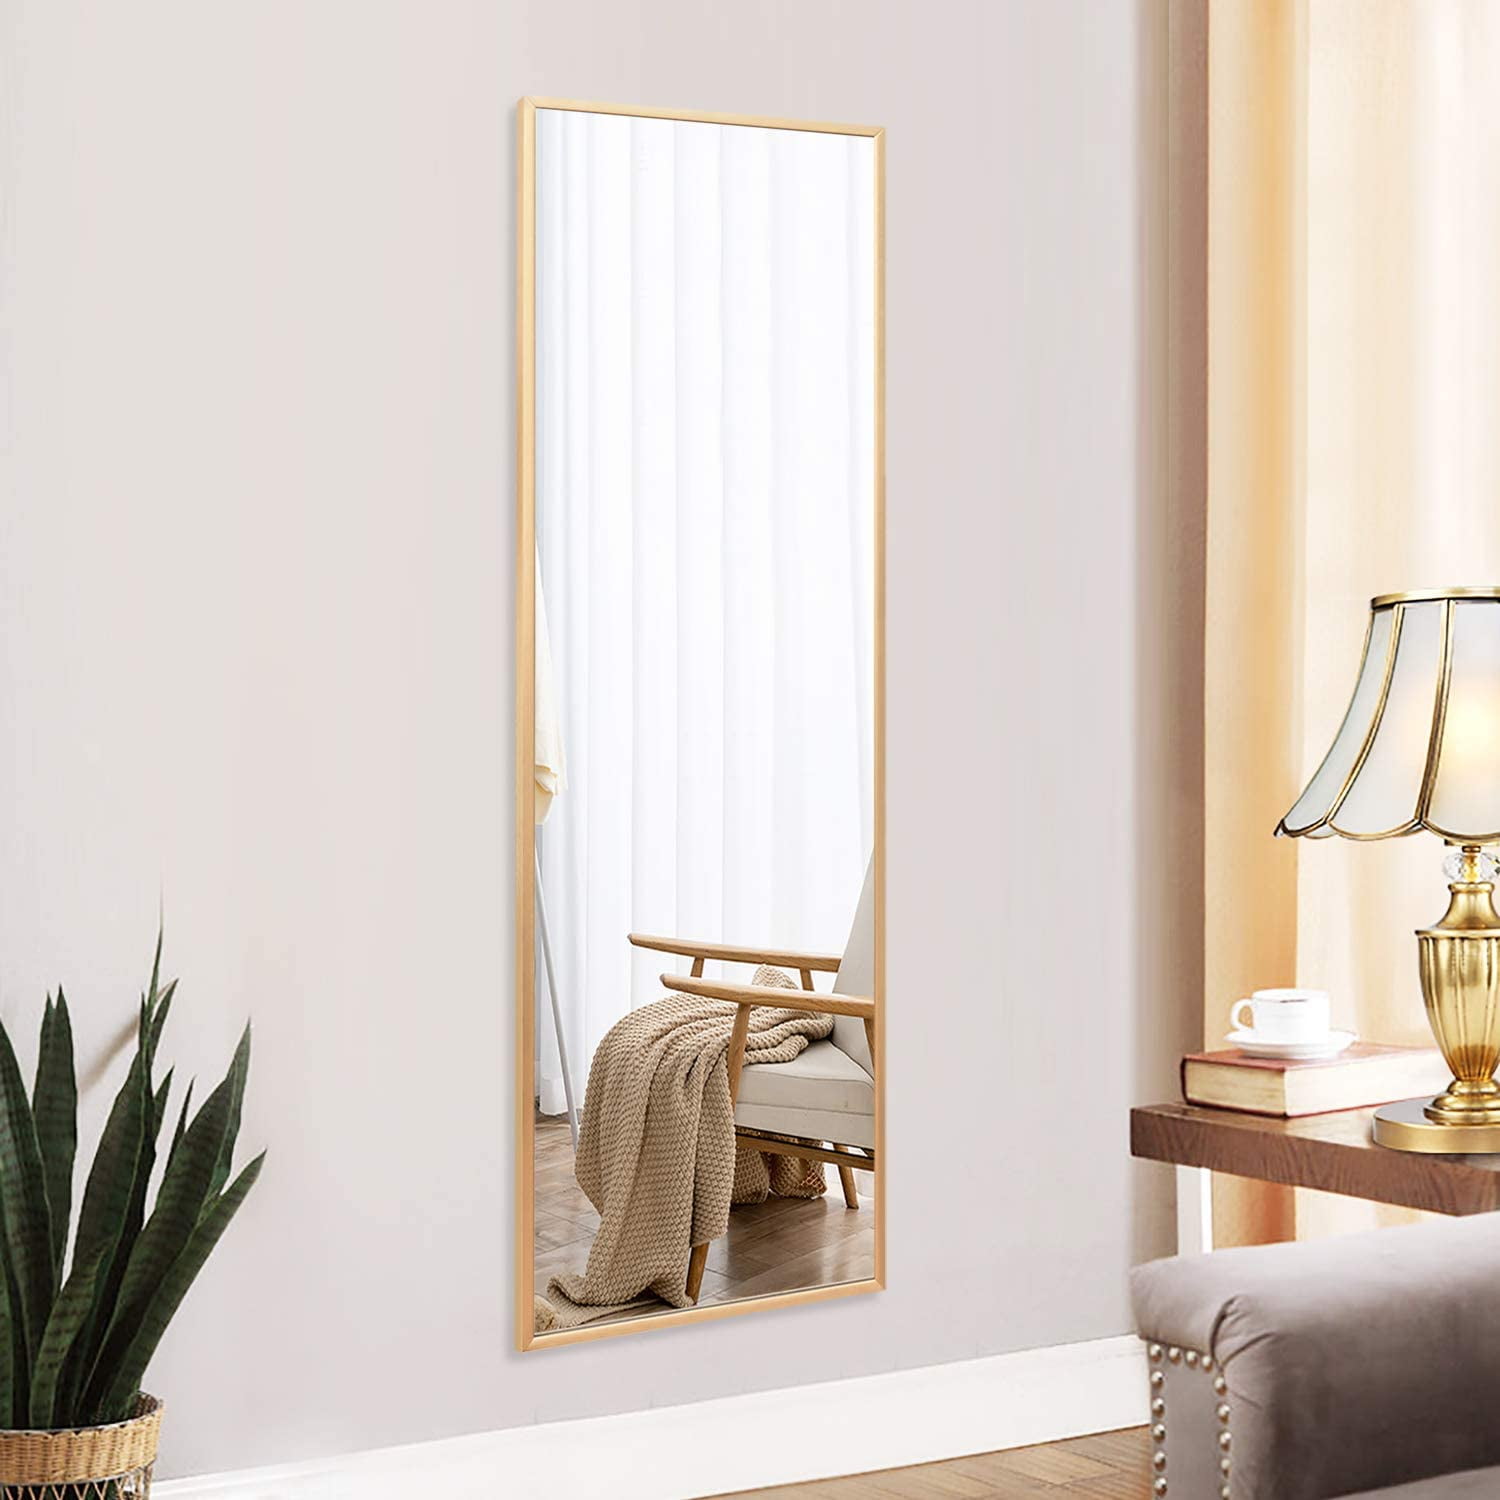 Full Length Wall Mount Frameless Mirror for Make up and Wall Decor 